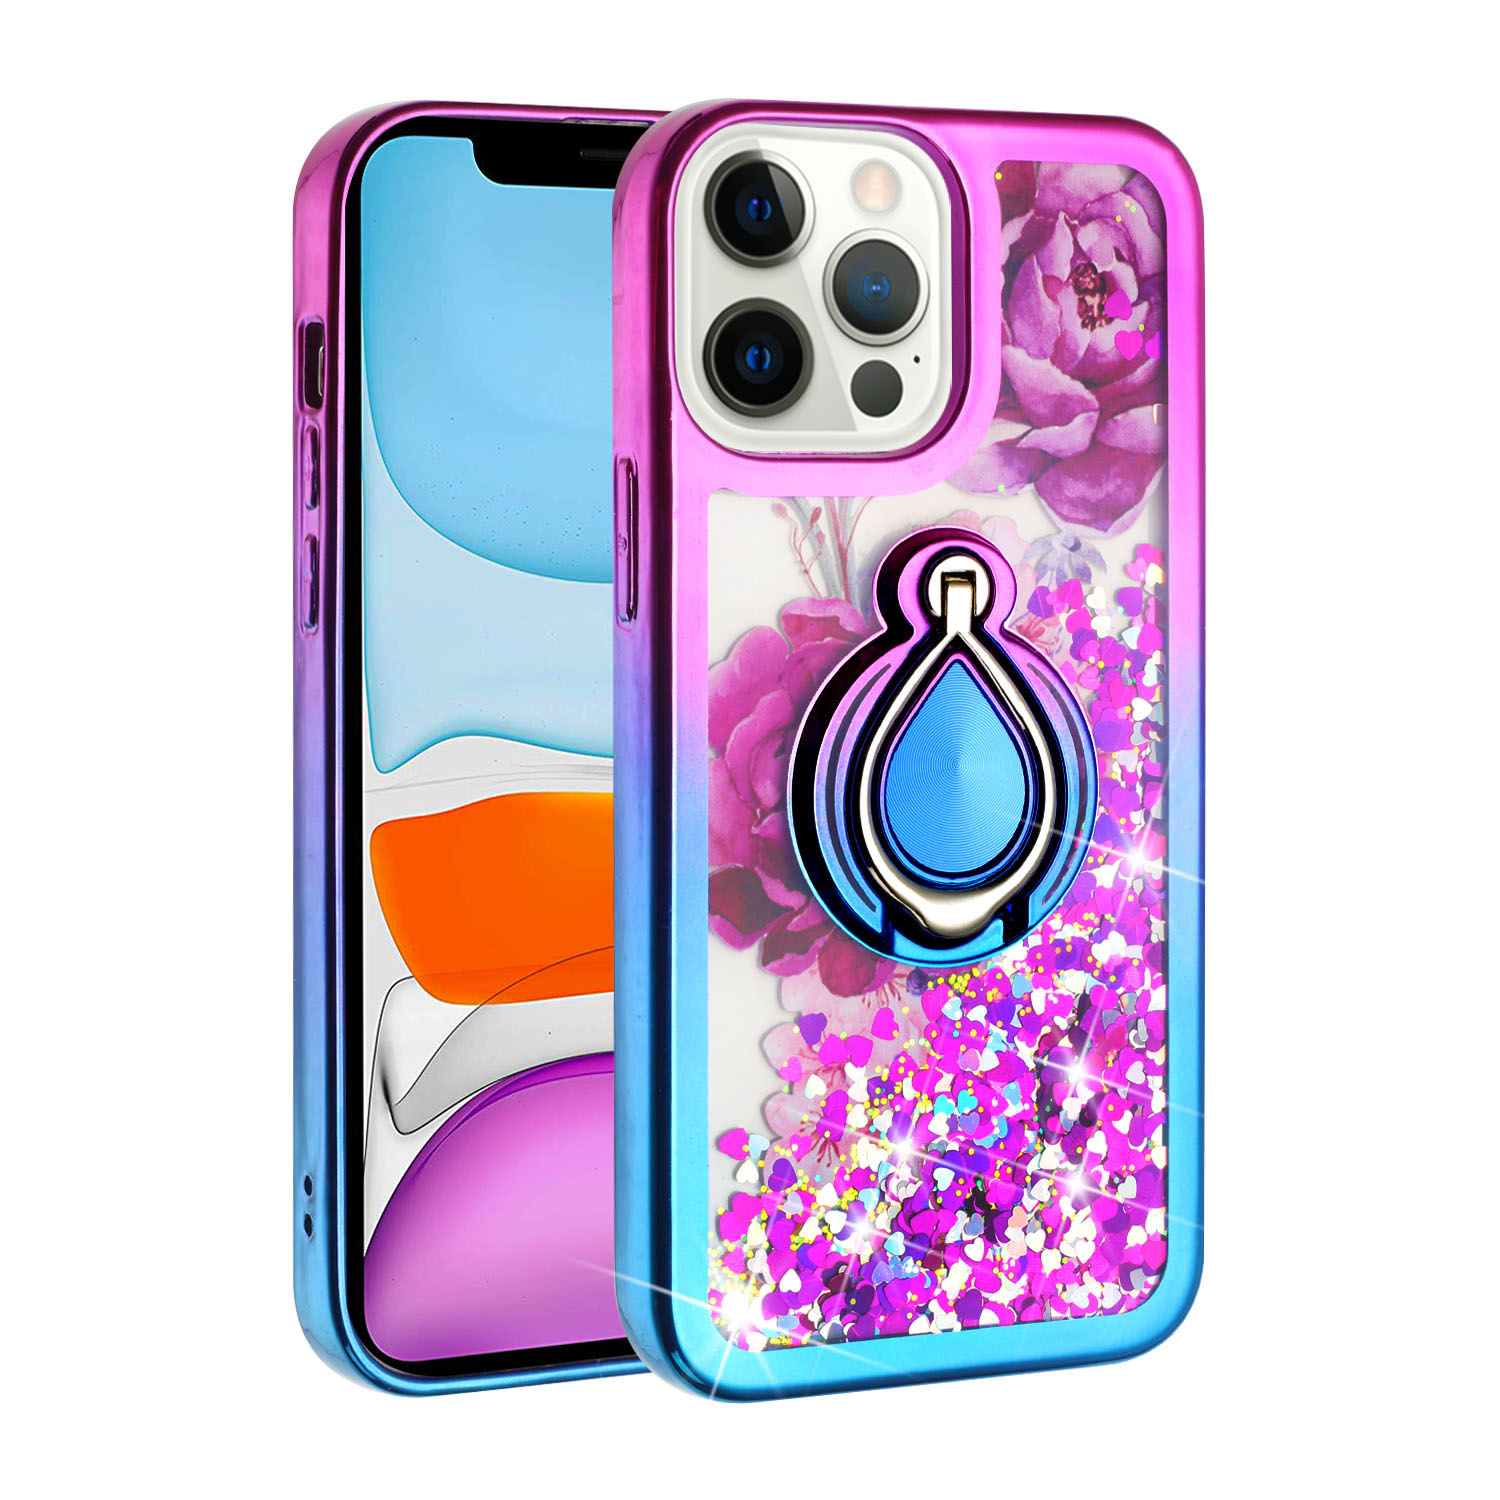 Star Dust Liquid Armor RING Stand Hybrid Case for Apple iPhone 13 Pro [6.1] (Hot Pink / Blue)